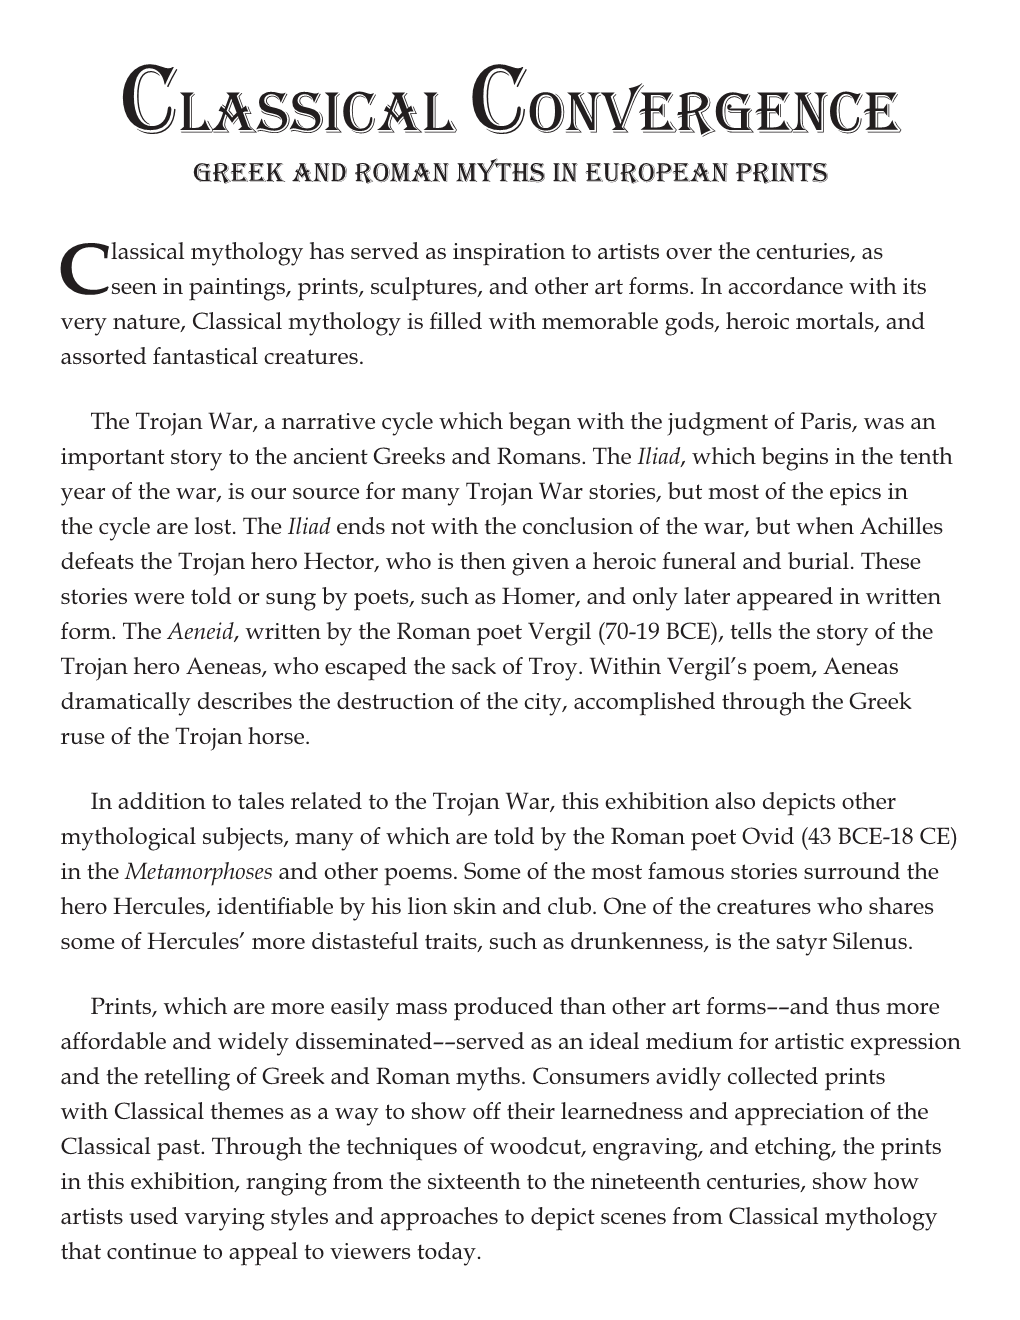 Classical Convergence Greek and Roman Myths in European Prints